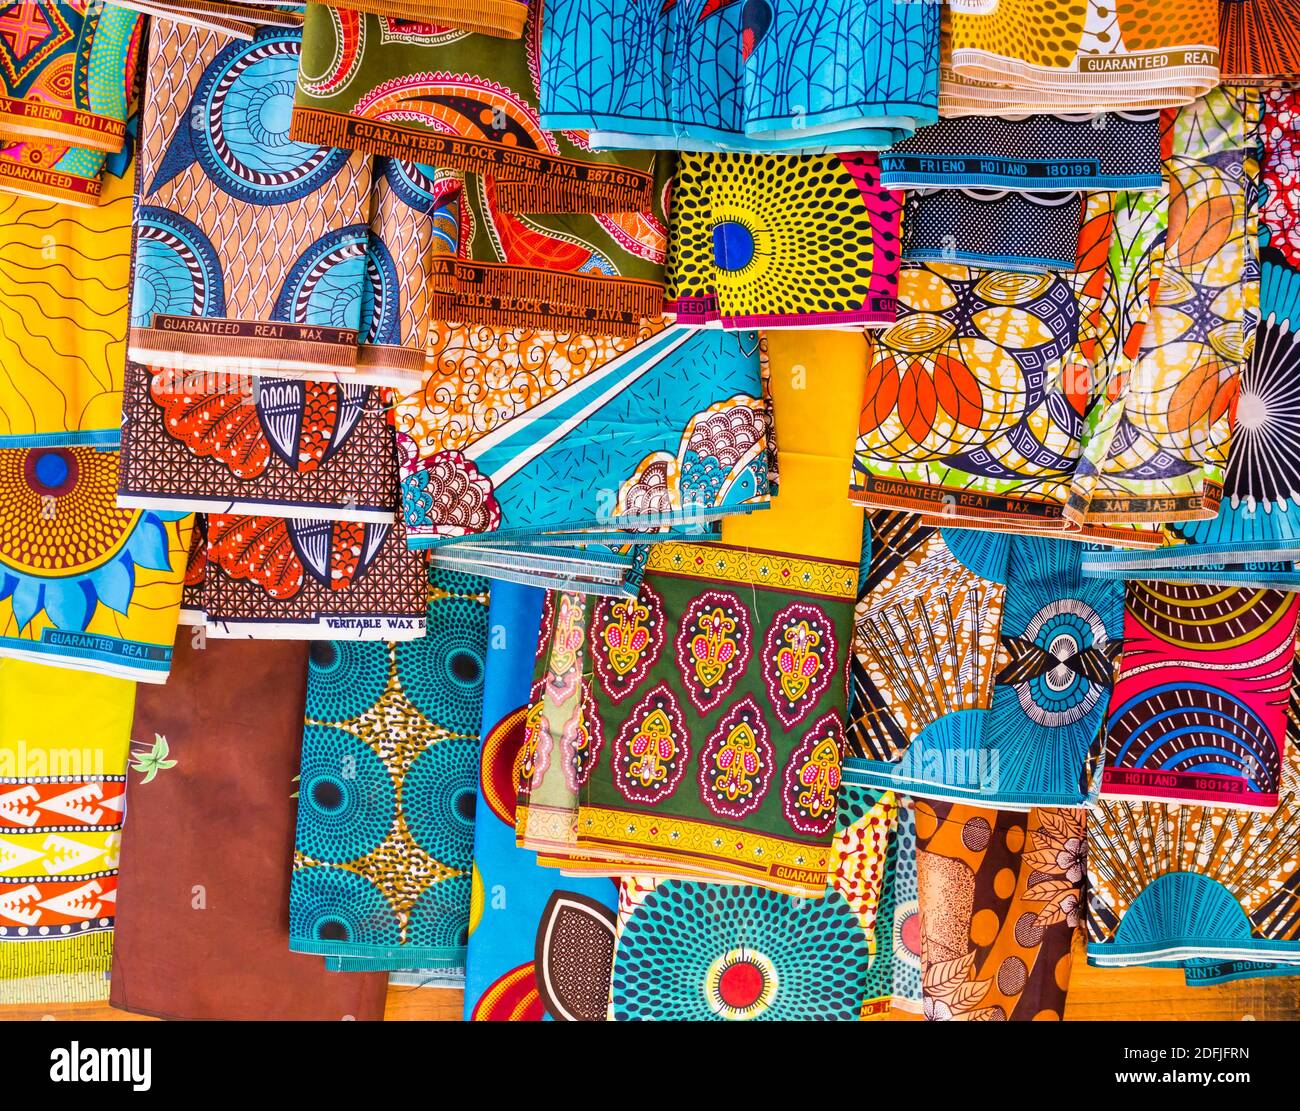 Display of multicolored ethnic pareo with floral and geometric shapes,  Antananarivo market, Madagascar Stock Photo - Alamy